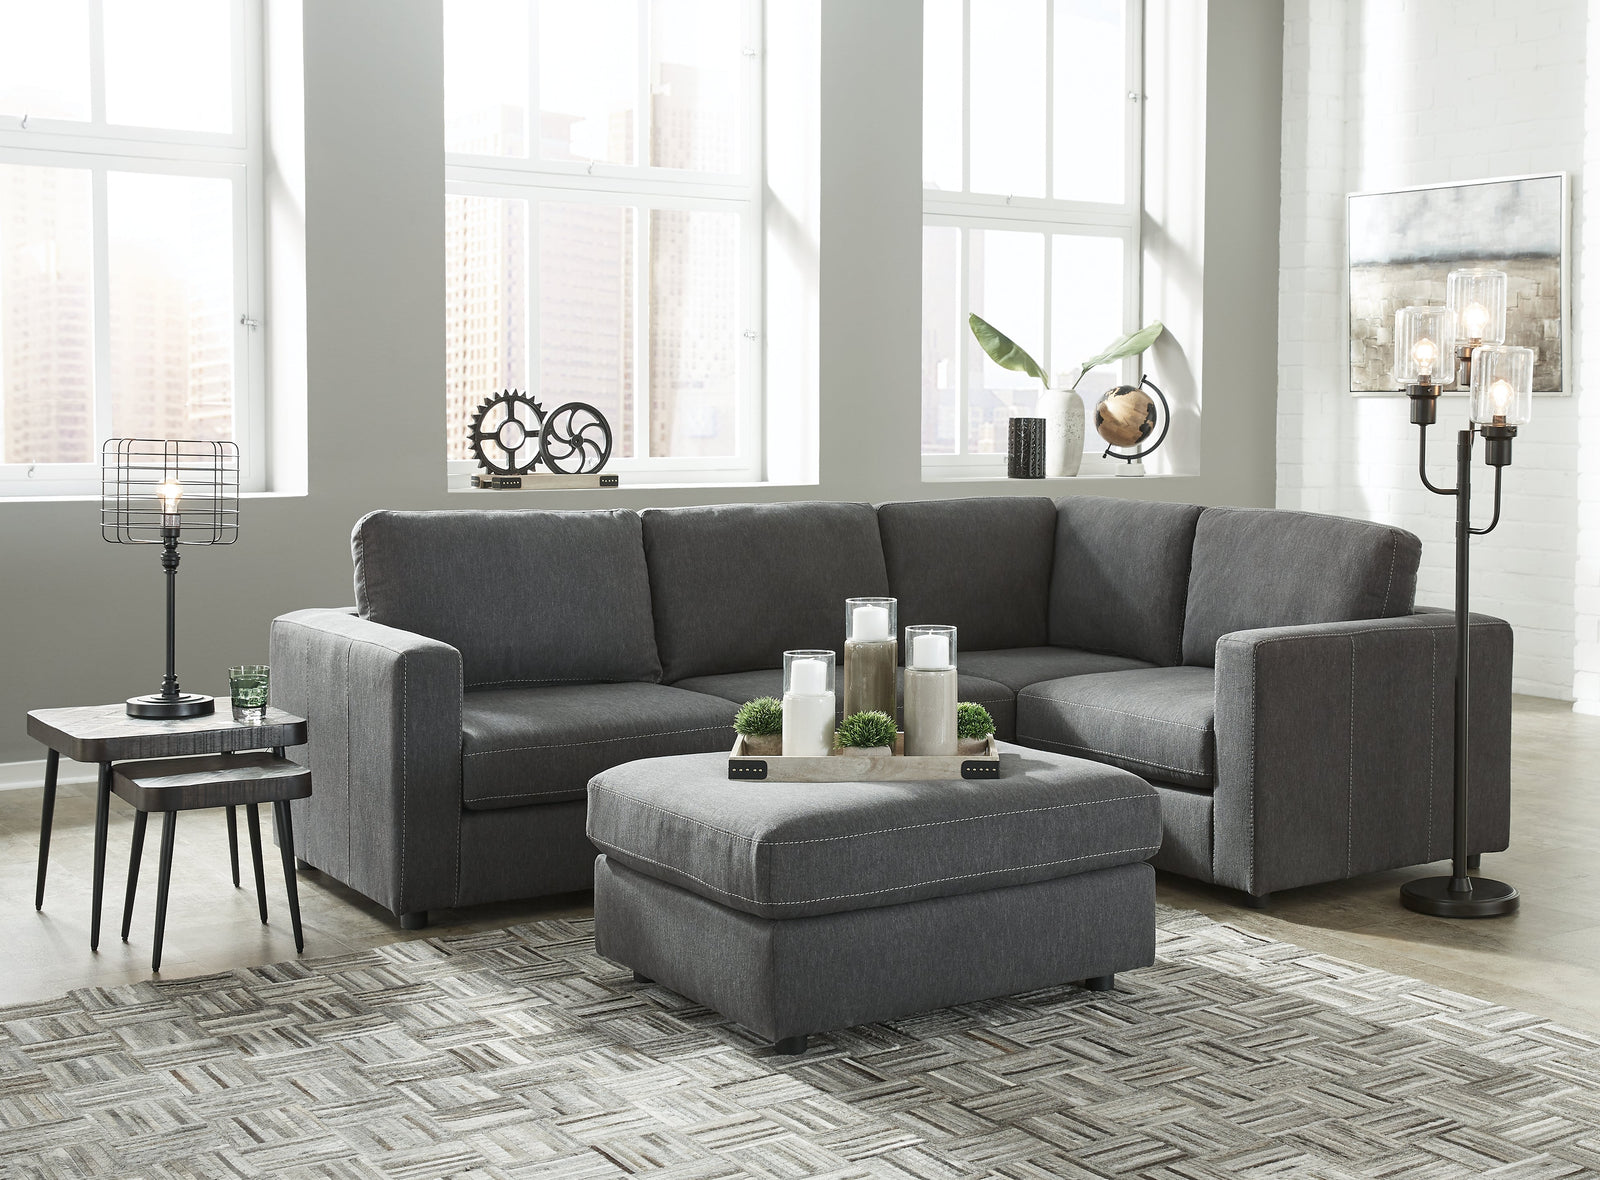 Candela Charcoal 4-Piece Sectional With Ottoman